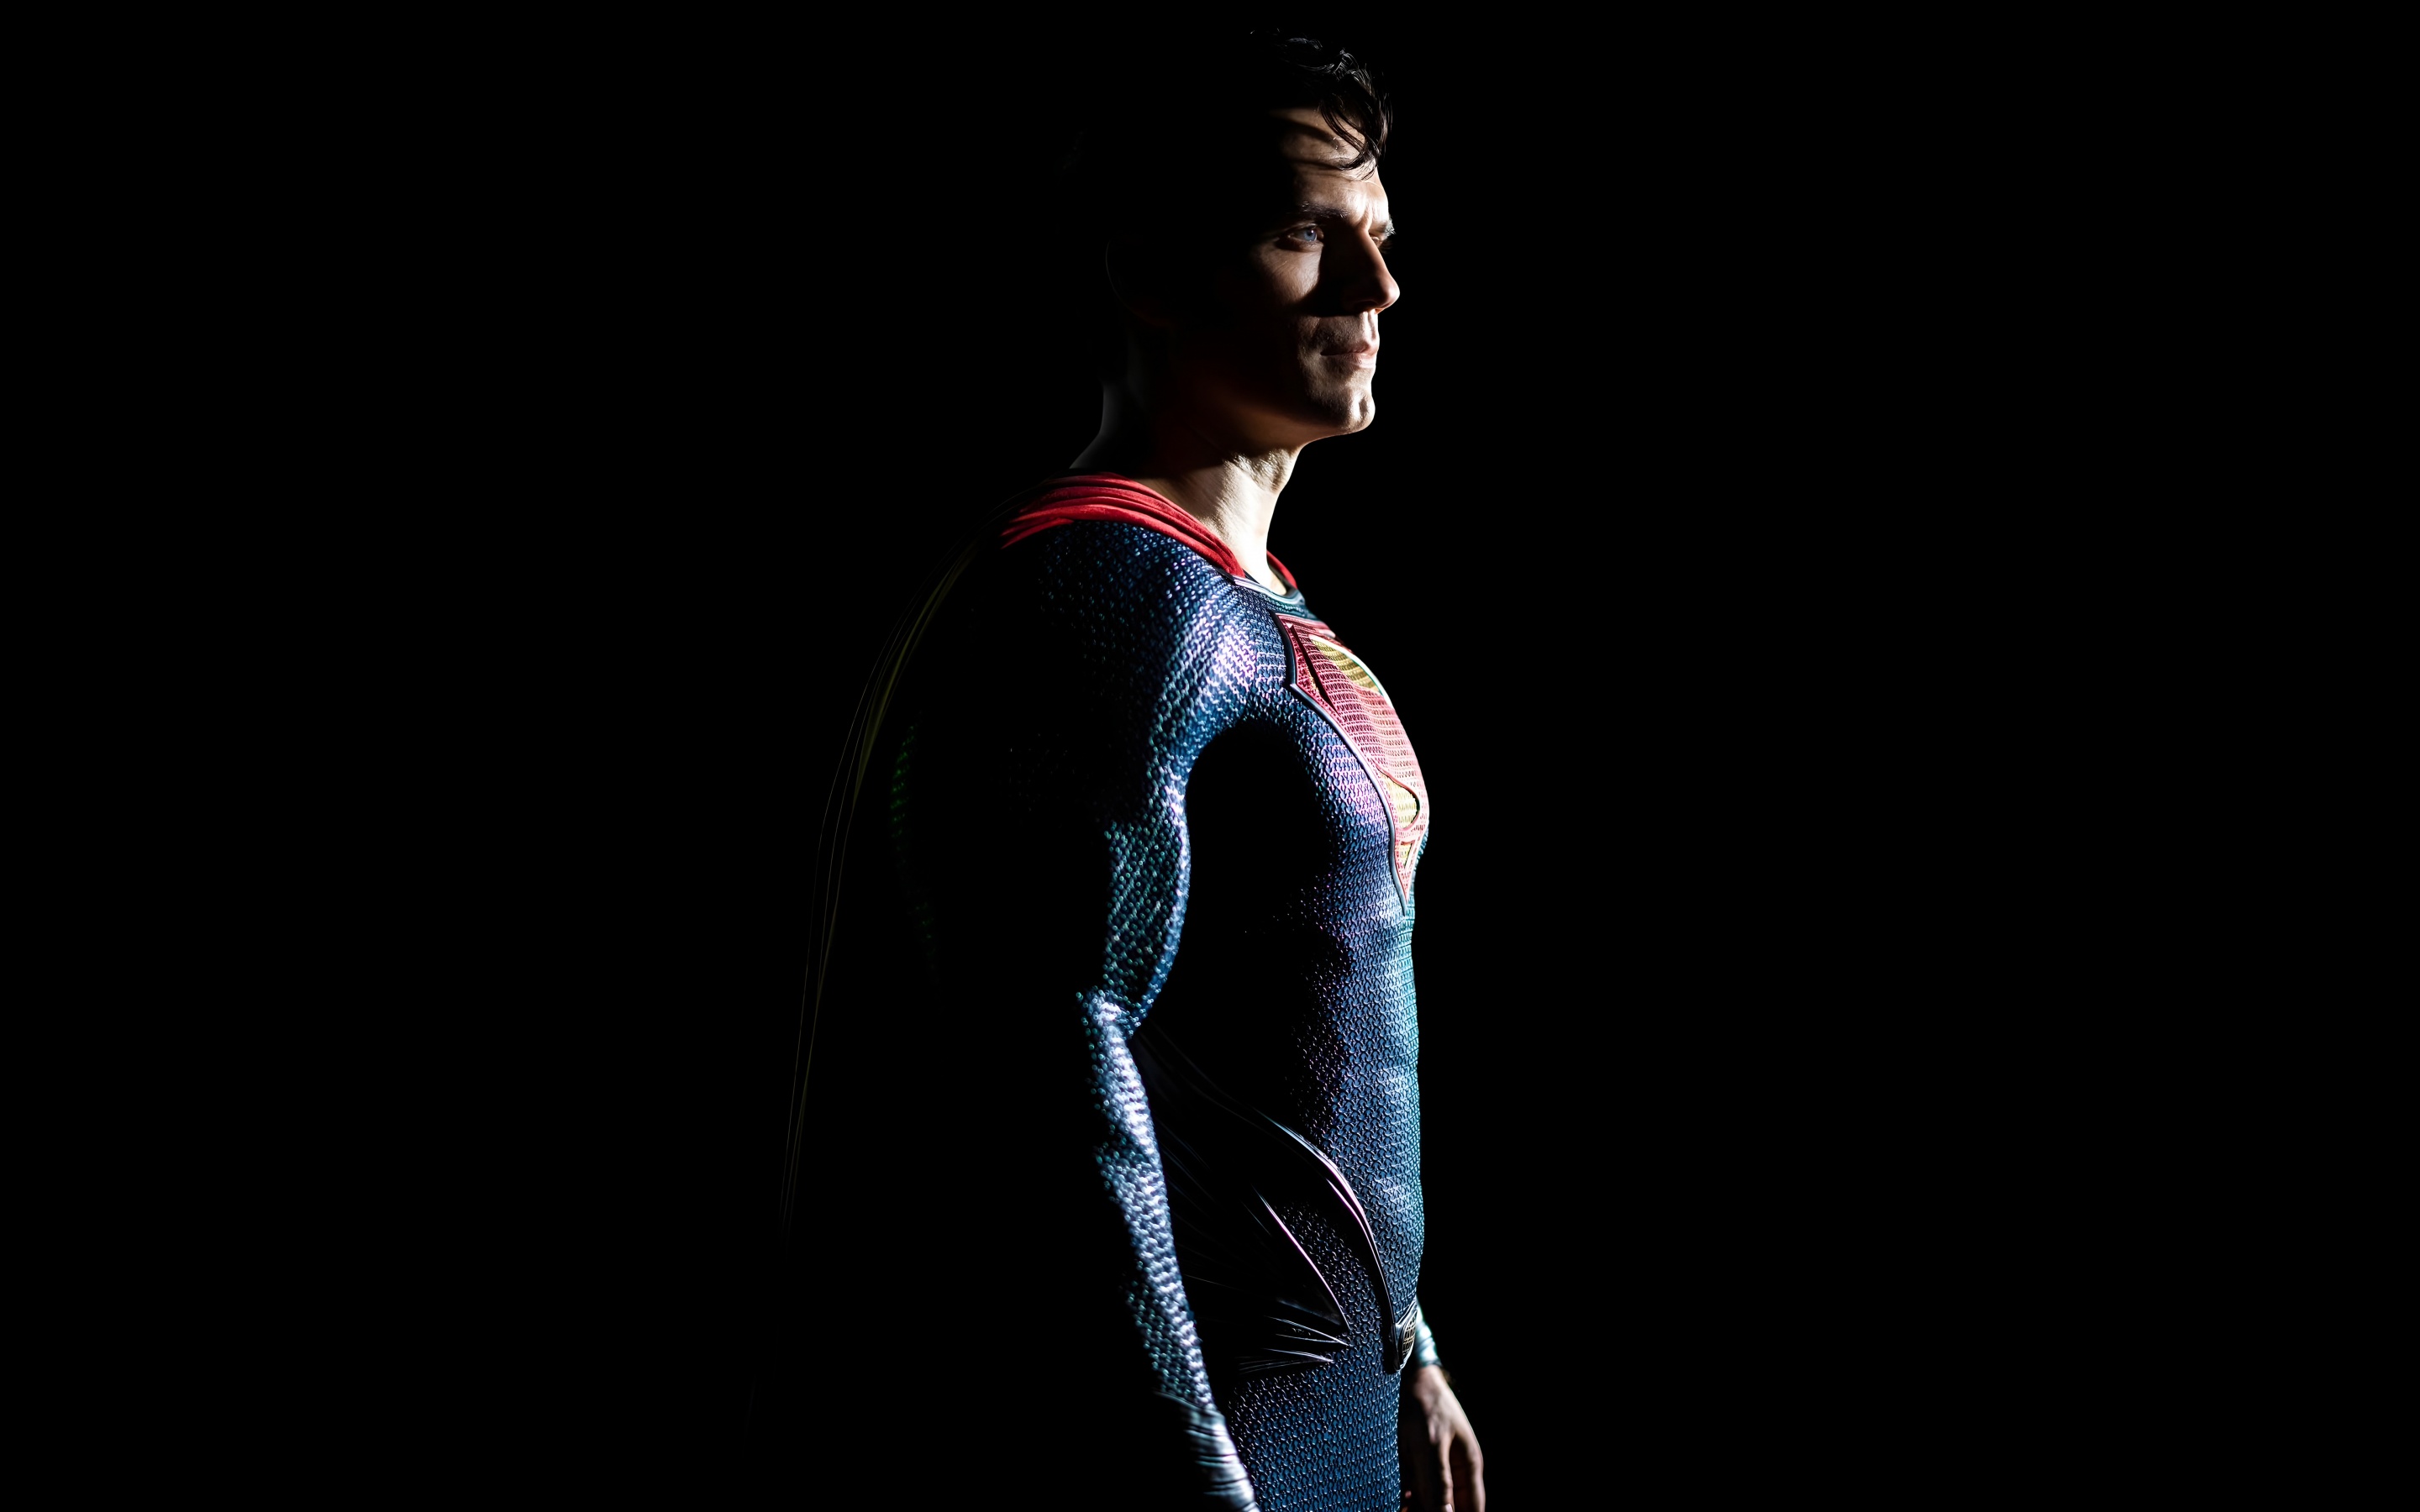 Top 999+ Superman Wallpaper Full HD, 4K✓Free to Use